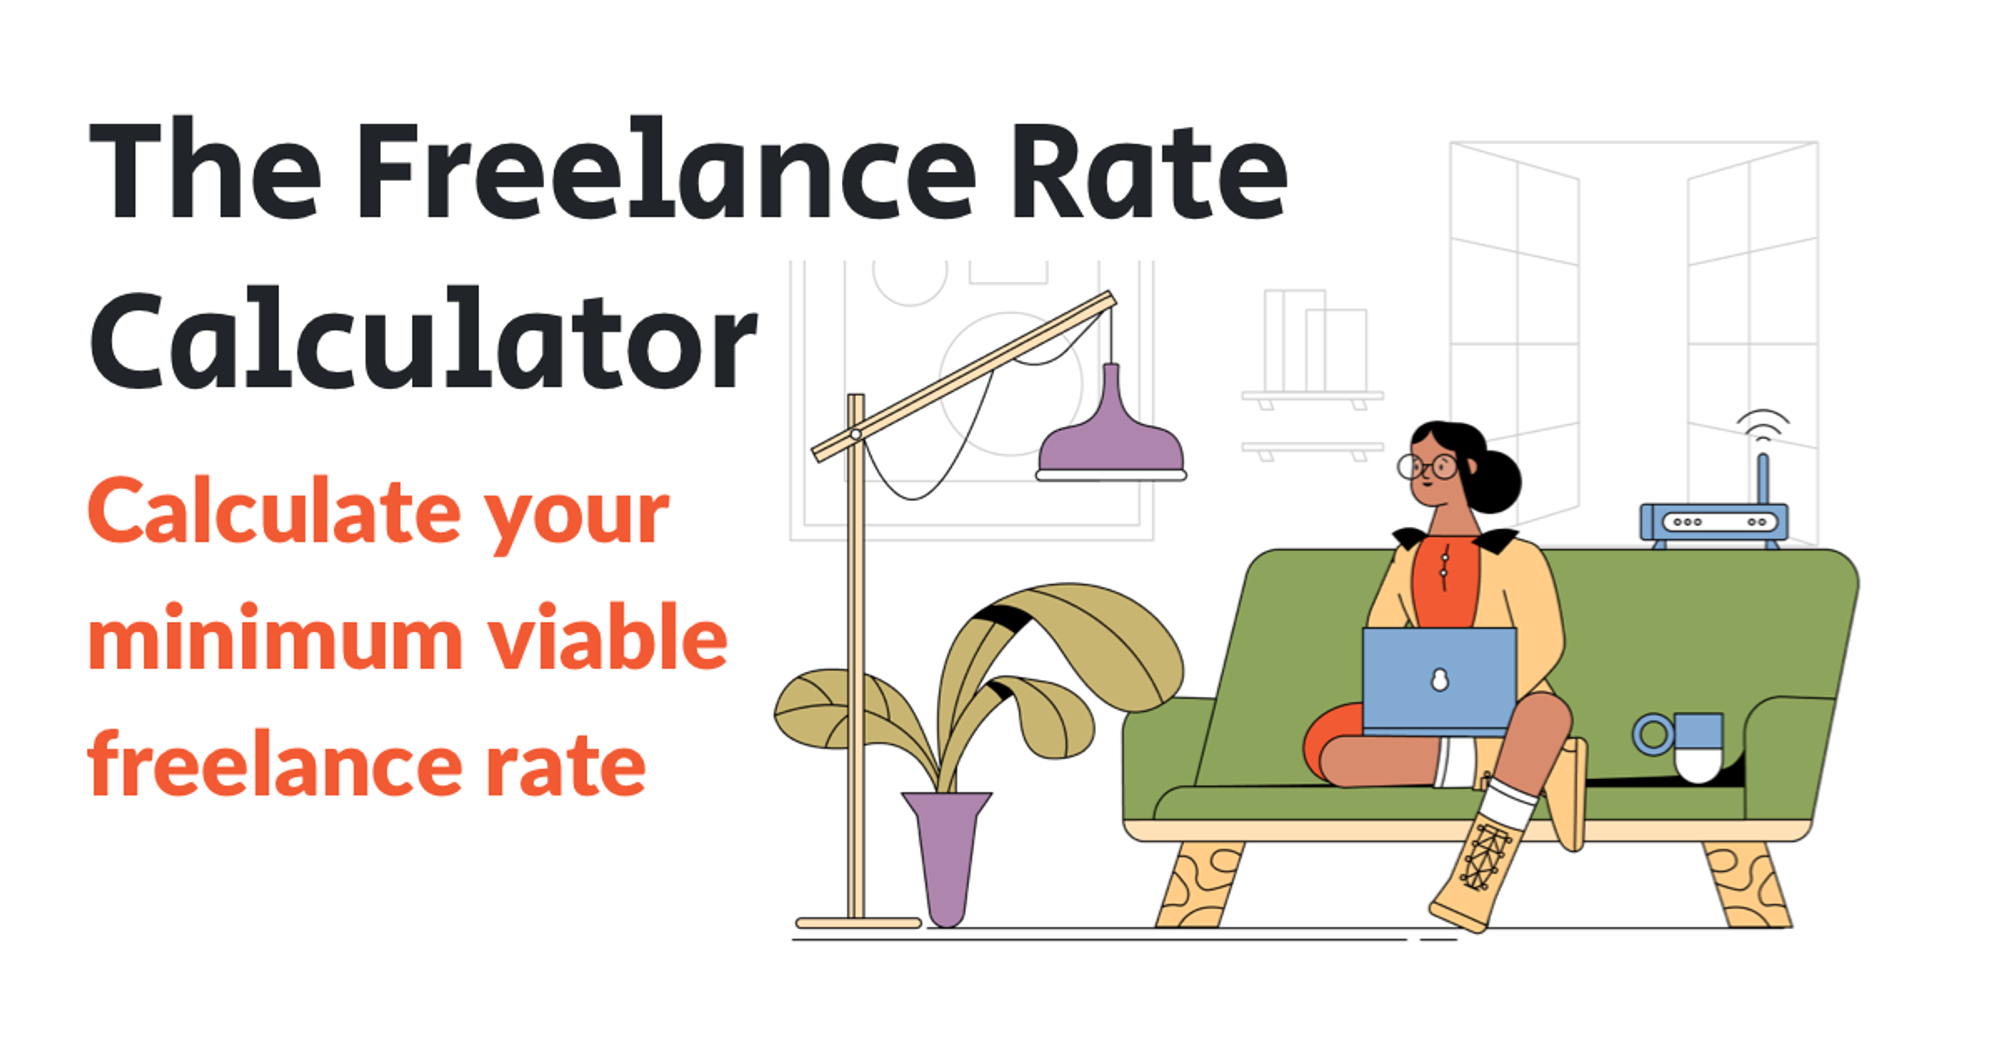 The Freelance Rate Calculator 👩‍💼